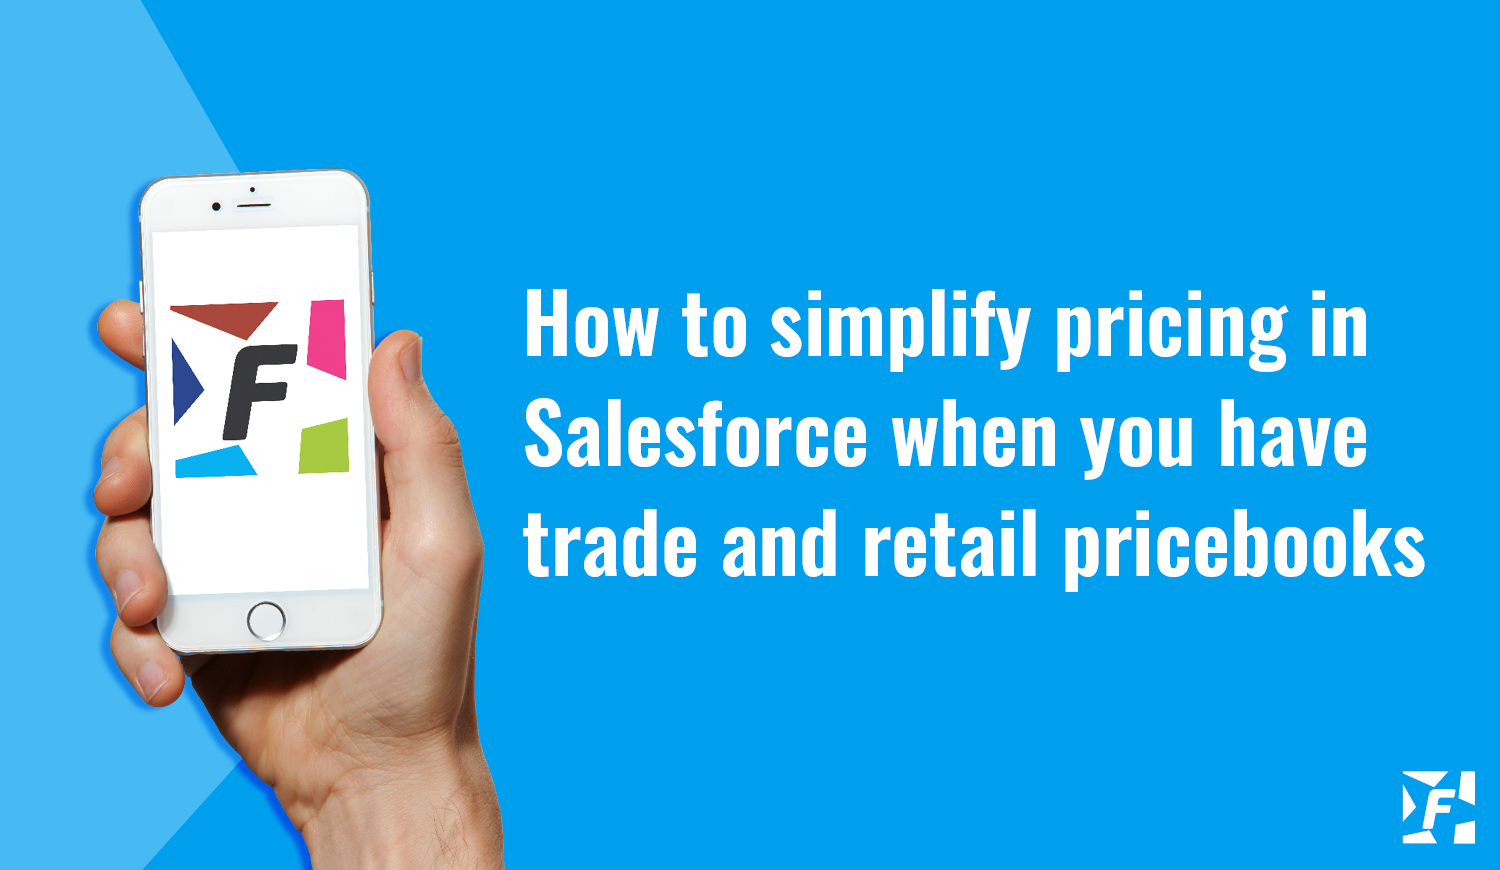 How to simplify pricing in Salesforce when you have trade and retail pricebooks